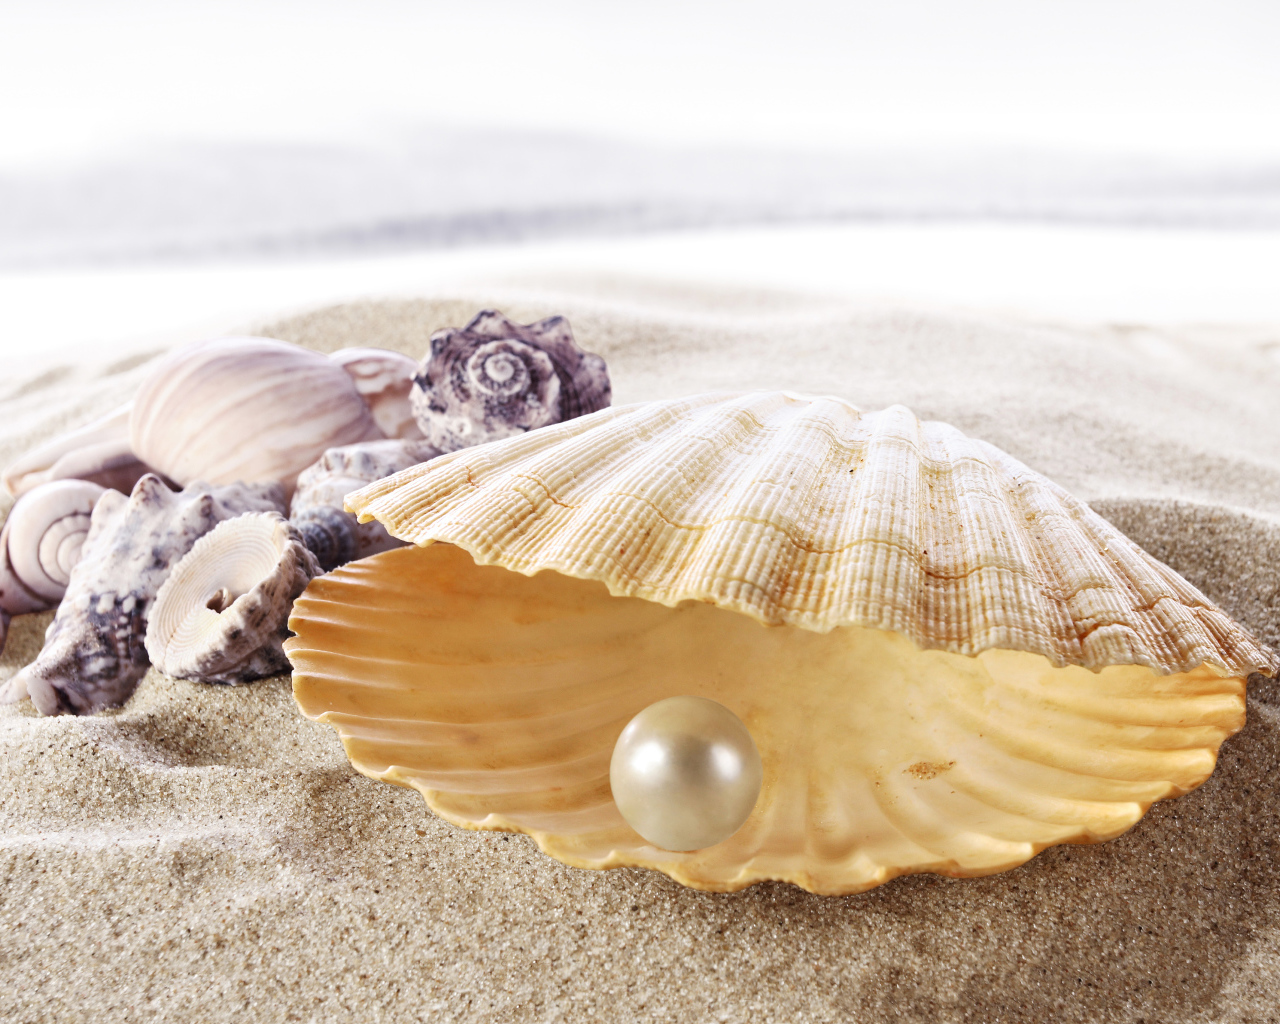 Sea beautiful shell with white pearl inside